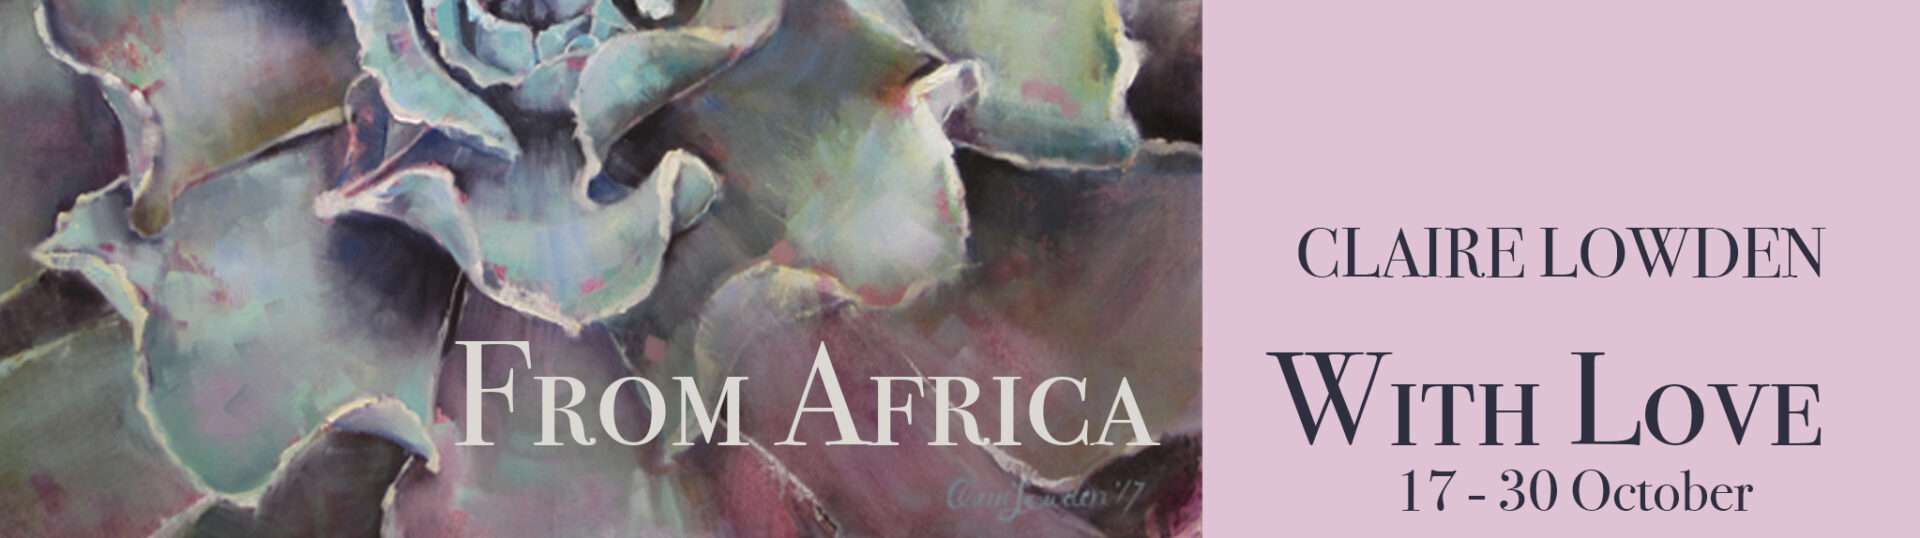 The Studio Art Gallery - Exhibition Header - From Africa With Love - Claire Lowden a Solo Exhibition